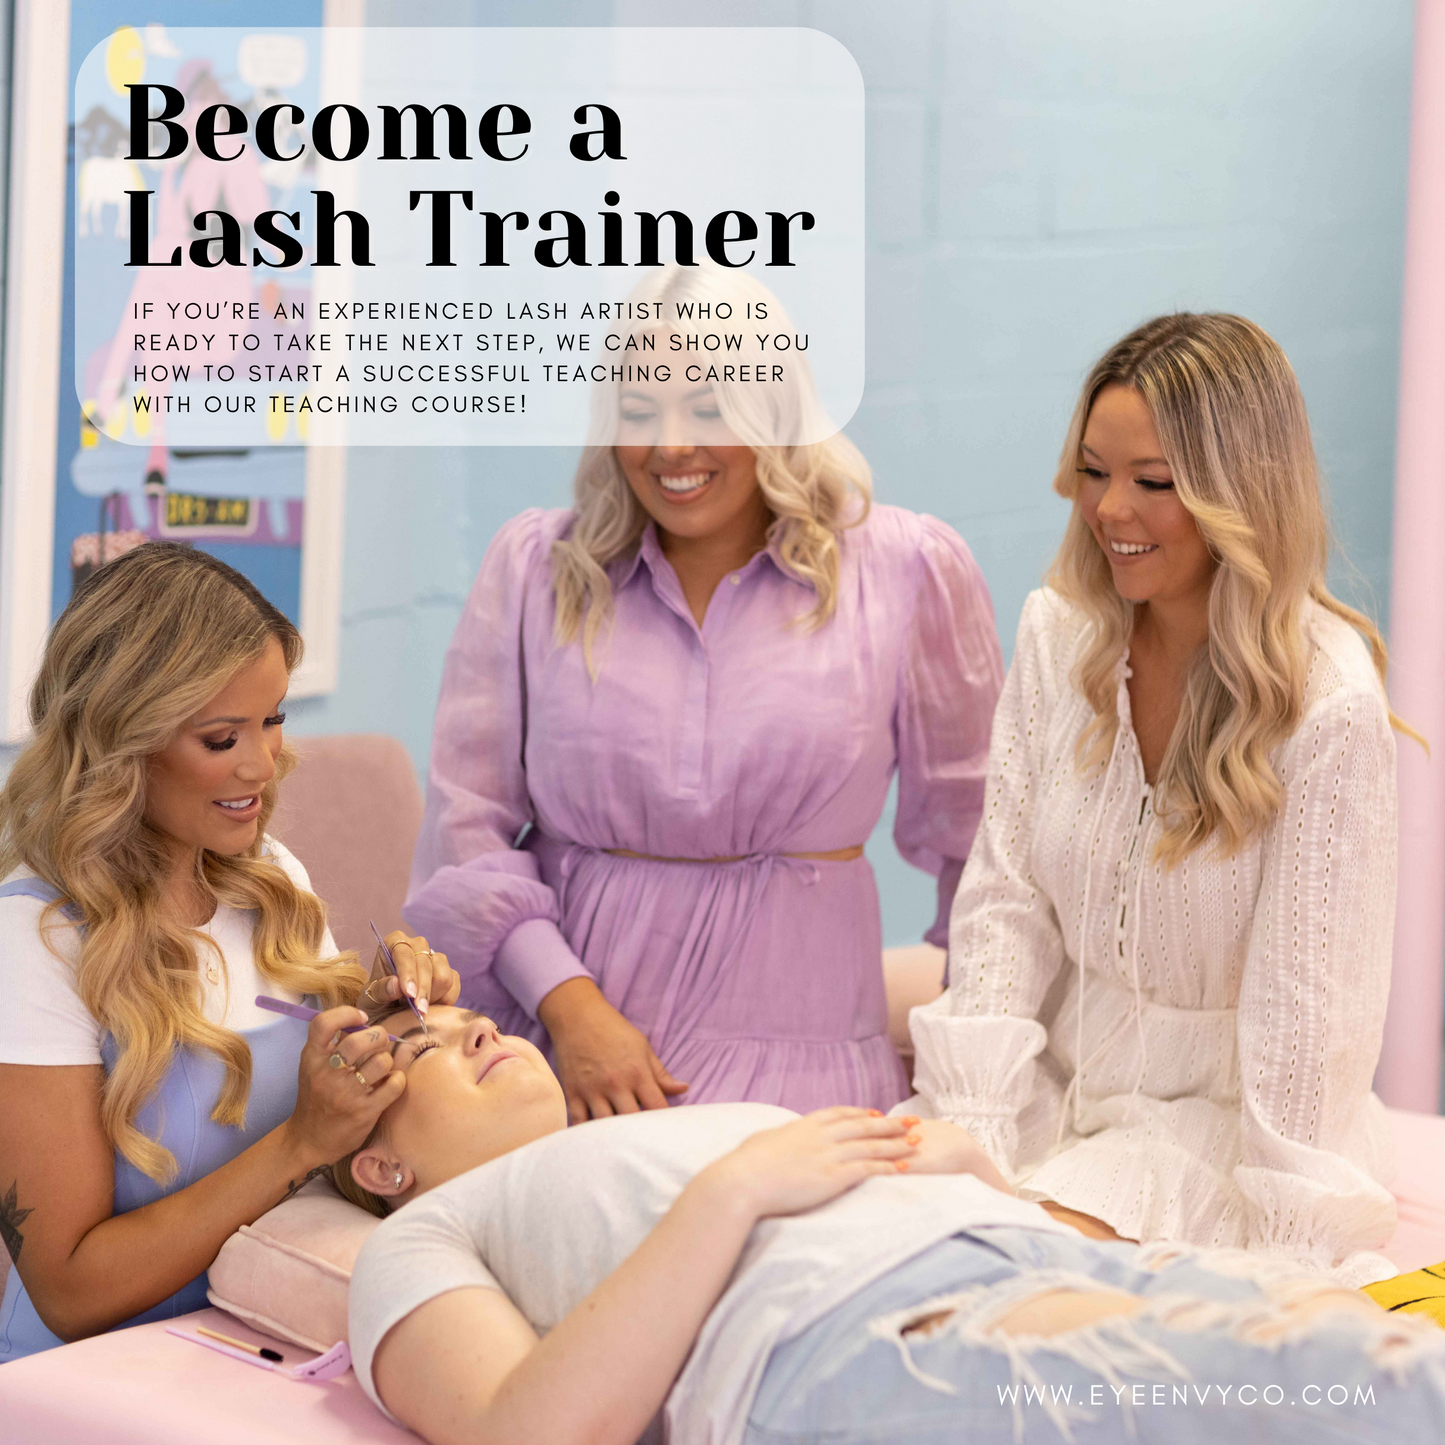 BECOME A LASH TRAINER COURSE: ONLINE OR IN PERSON